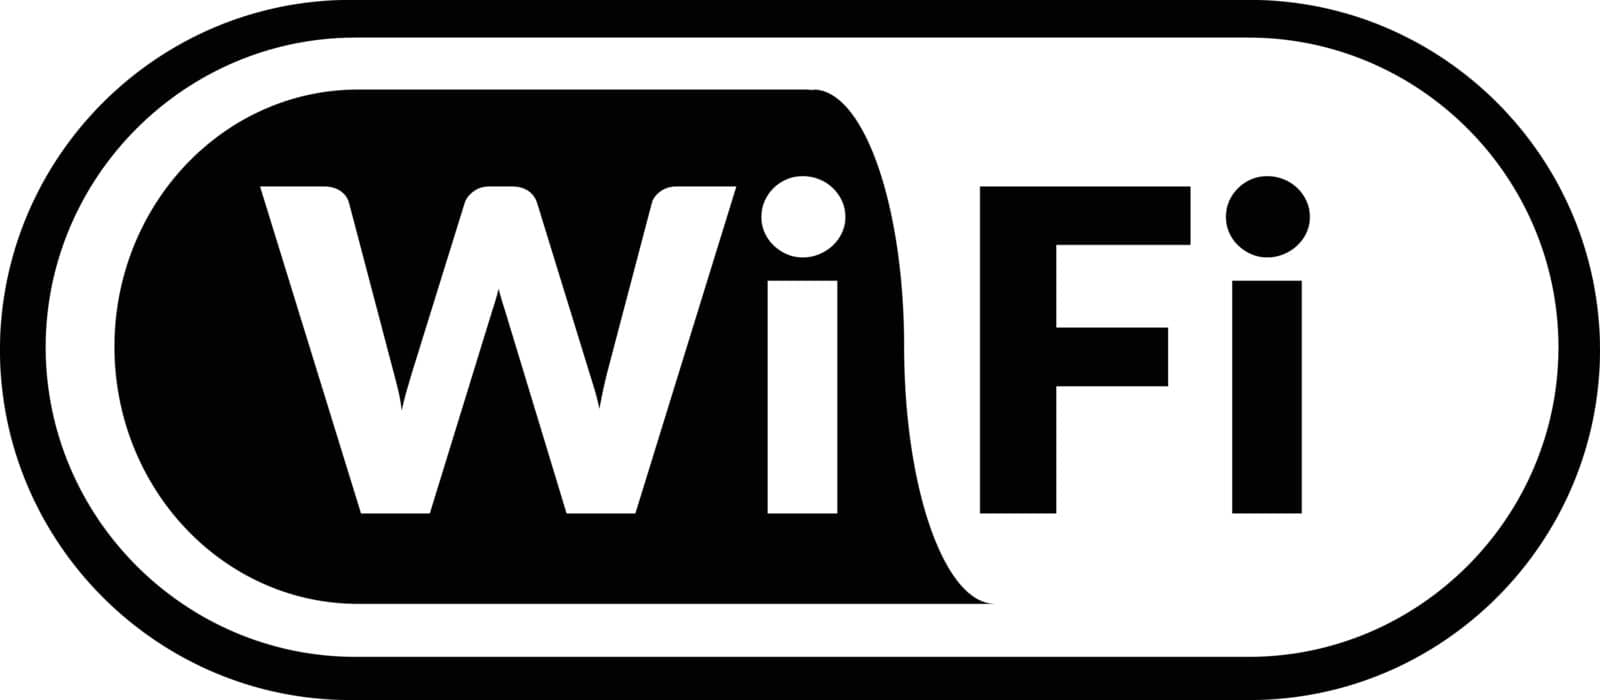 Wifi icon is basic vector icon, EPS10.